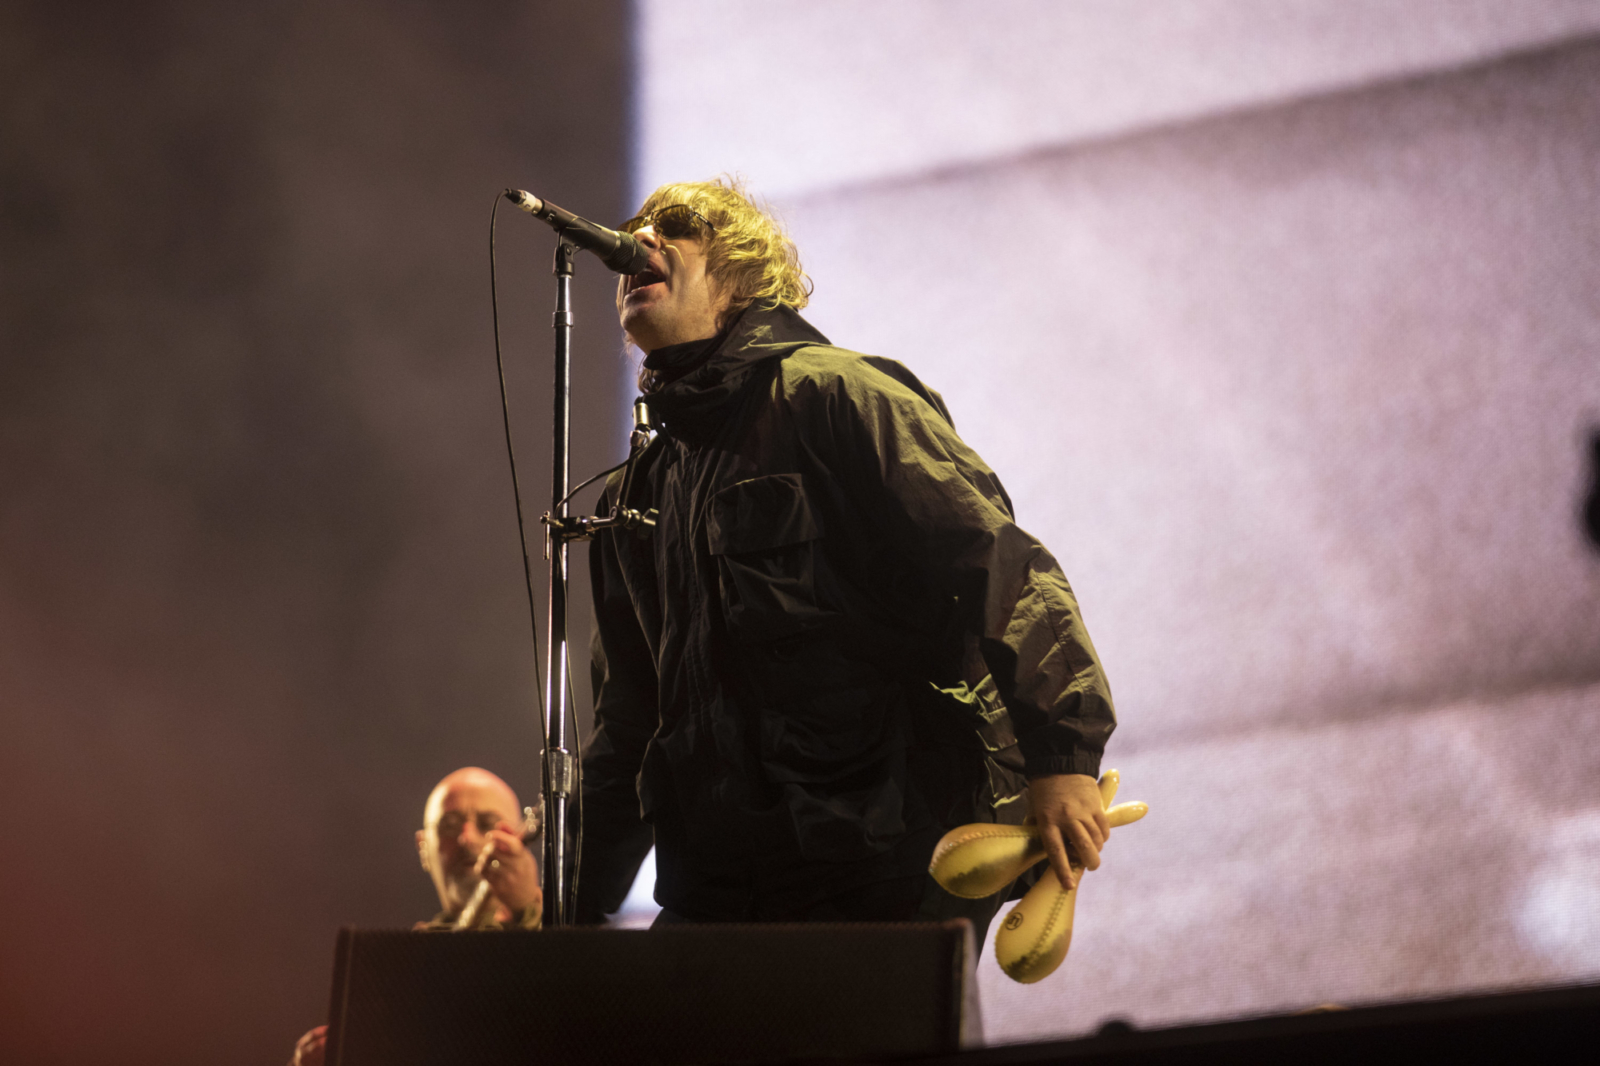 Watch Liam Gallagher perform 'Morning Glory' and 'Once' at Knebworth